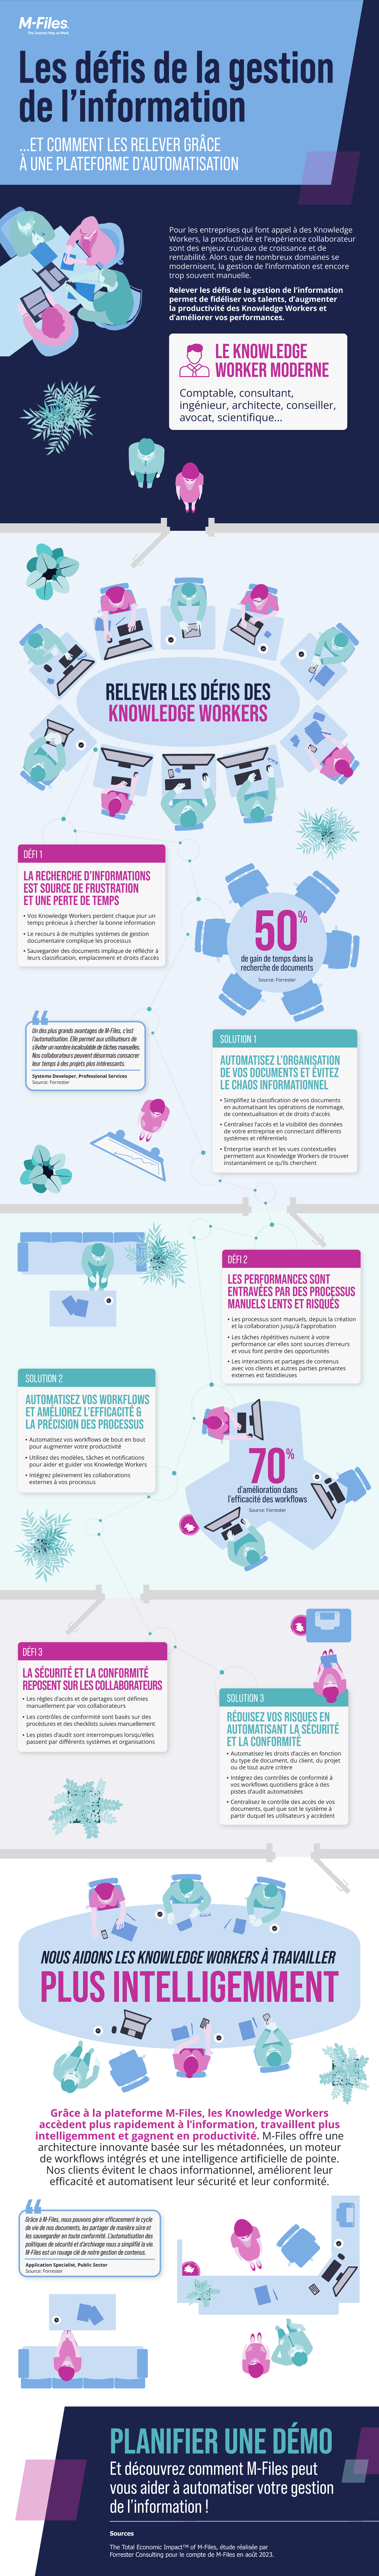 Infographic - Knowledge Work Automation - FR (ID 438472)